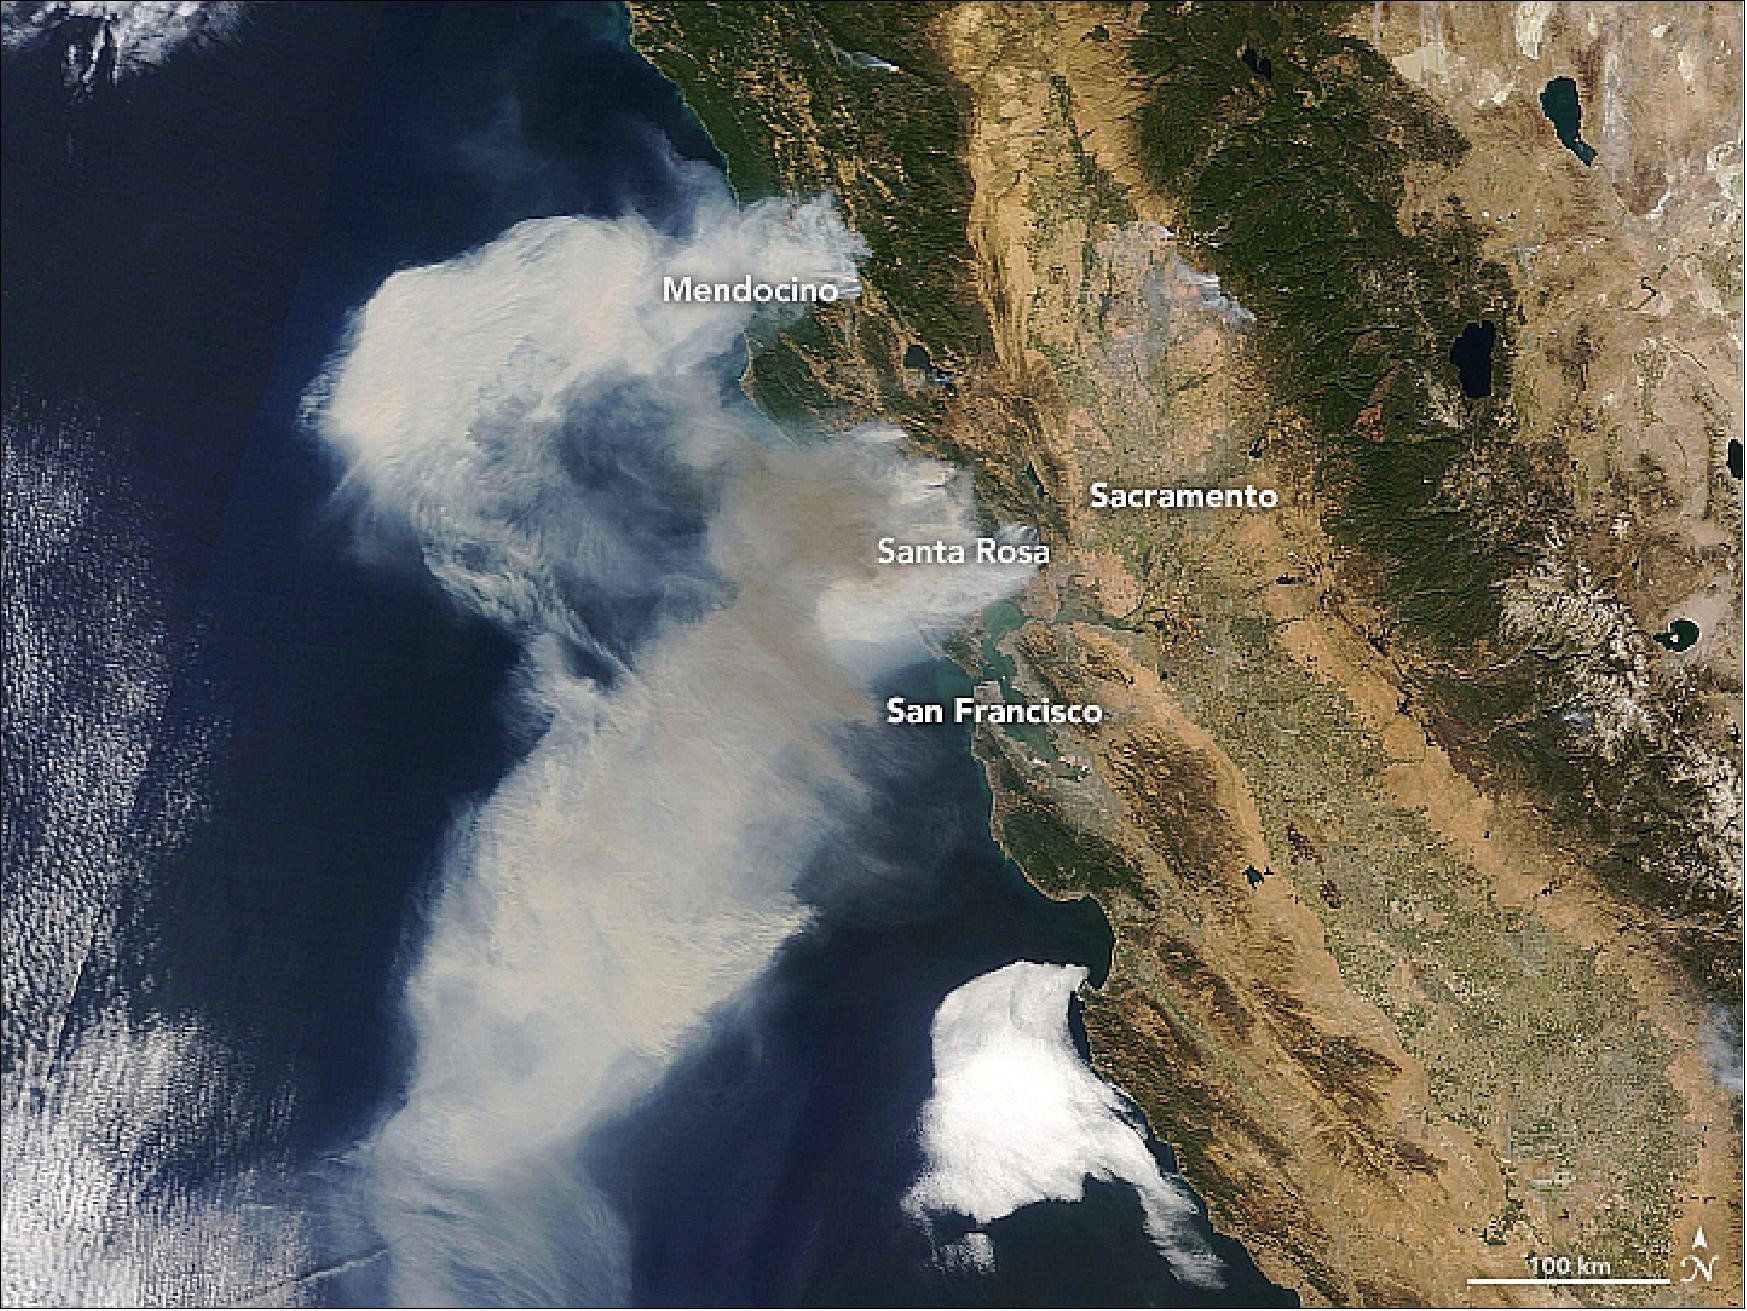 Figure 55: MODIS on Terra acquired this image of the fire regions in northern California in the late morning of 9 October 2017 (image credit: NASA Earth Observatory, image by Joshua Stevens, using MODIS data from LANCE/EOSDIS Rapid Response. Story by Mike Carlowicz)